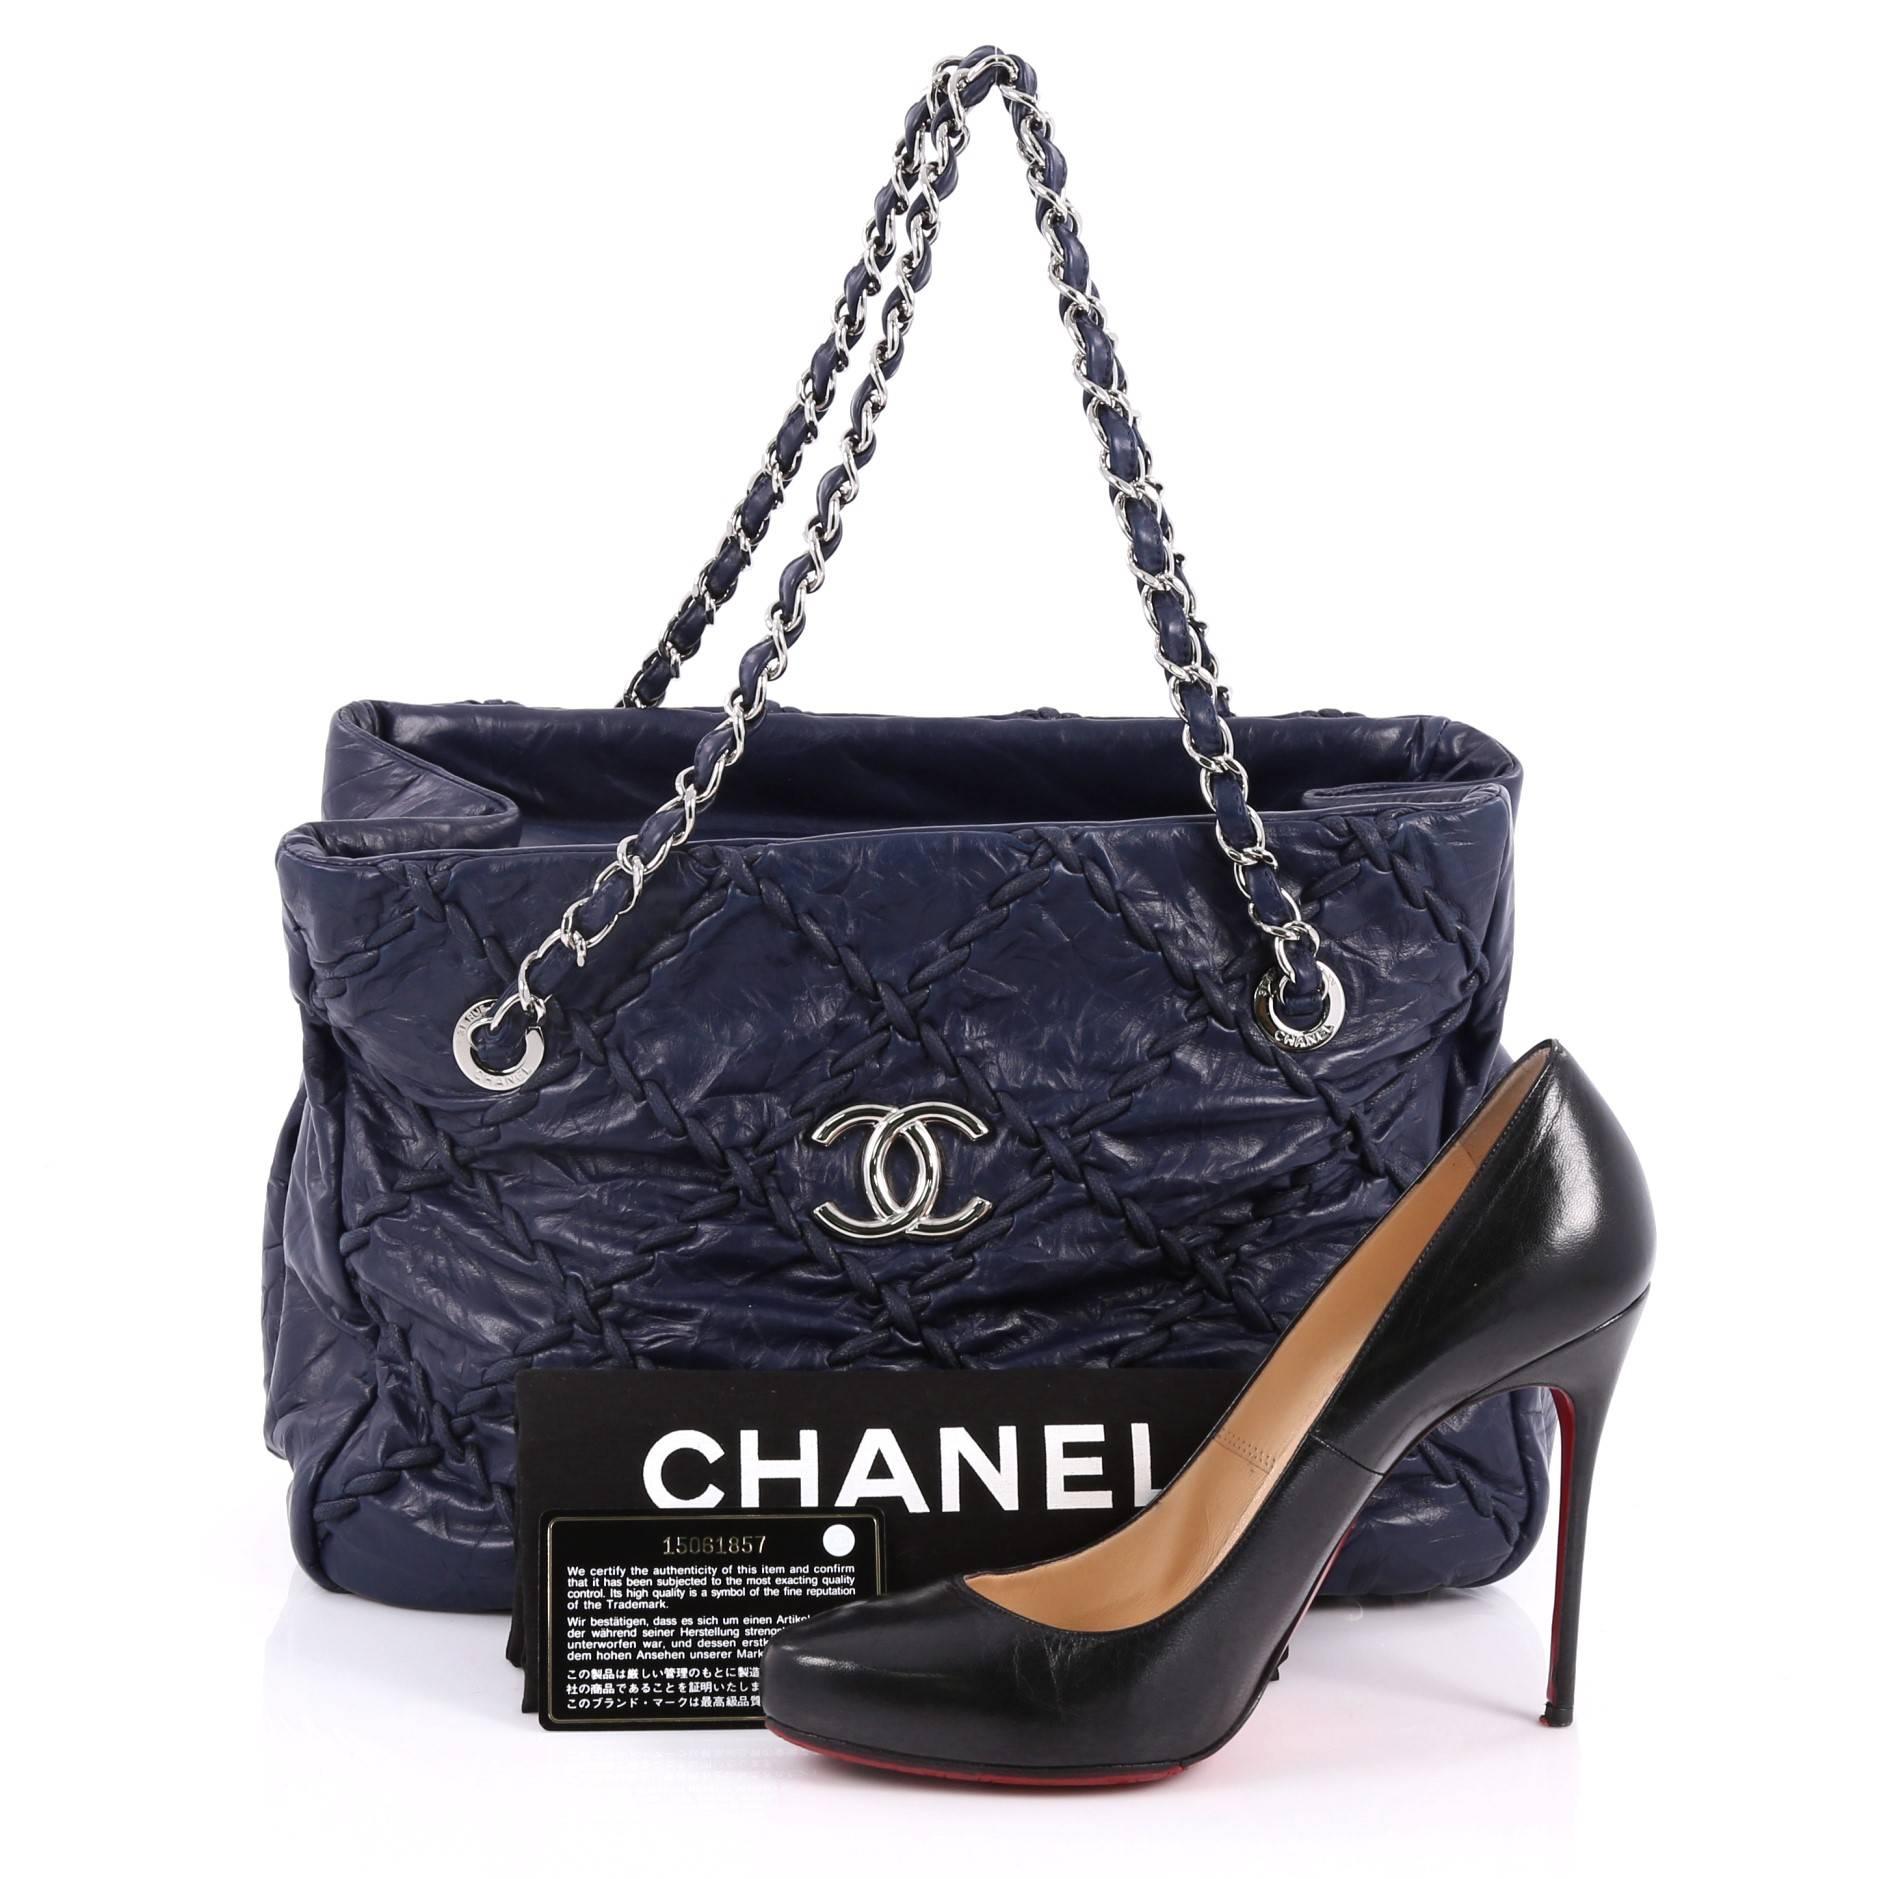 This authentic Chanel Ultra Stitch Chain Tote Leather is a must for any collection. Crafted from blue quilted leather, this subtly eye-catching tote bag features oversized diamond leather stitching details, CC interlocking logo on the front, dual